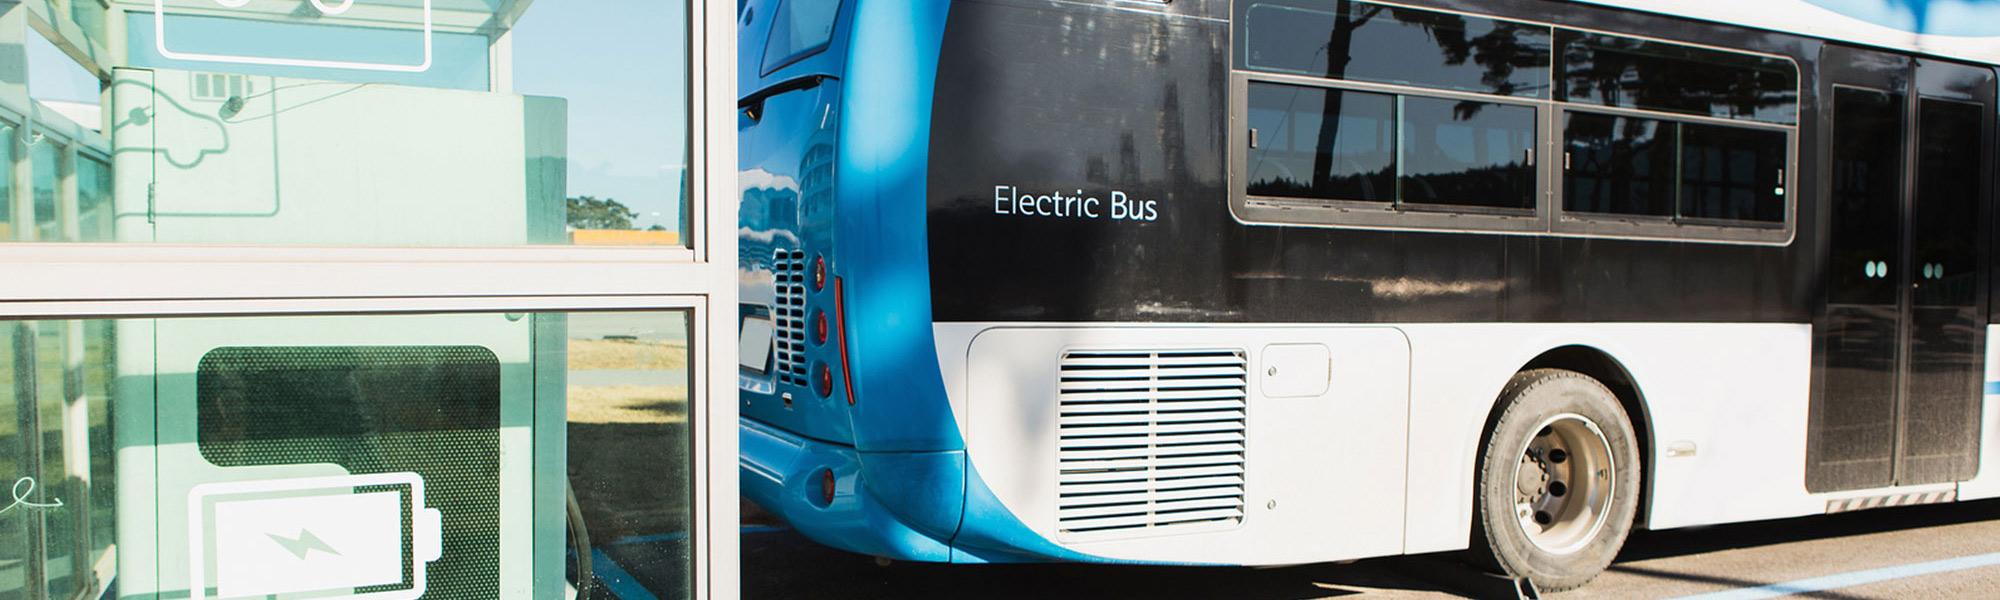 Electric Bus and Truck Drives